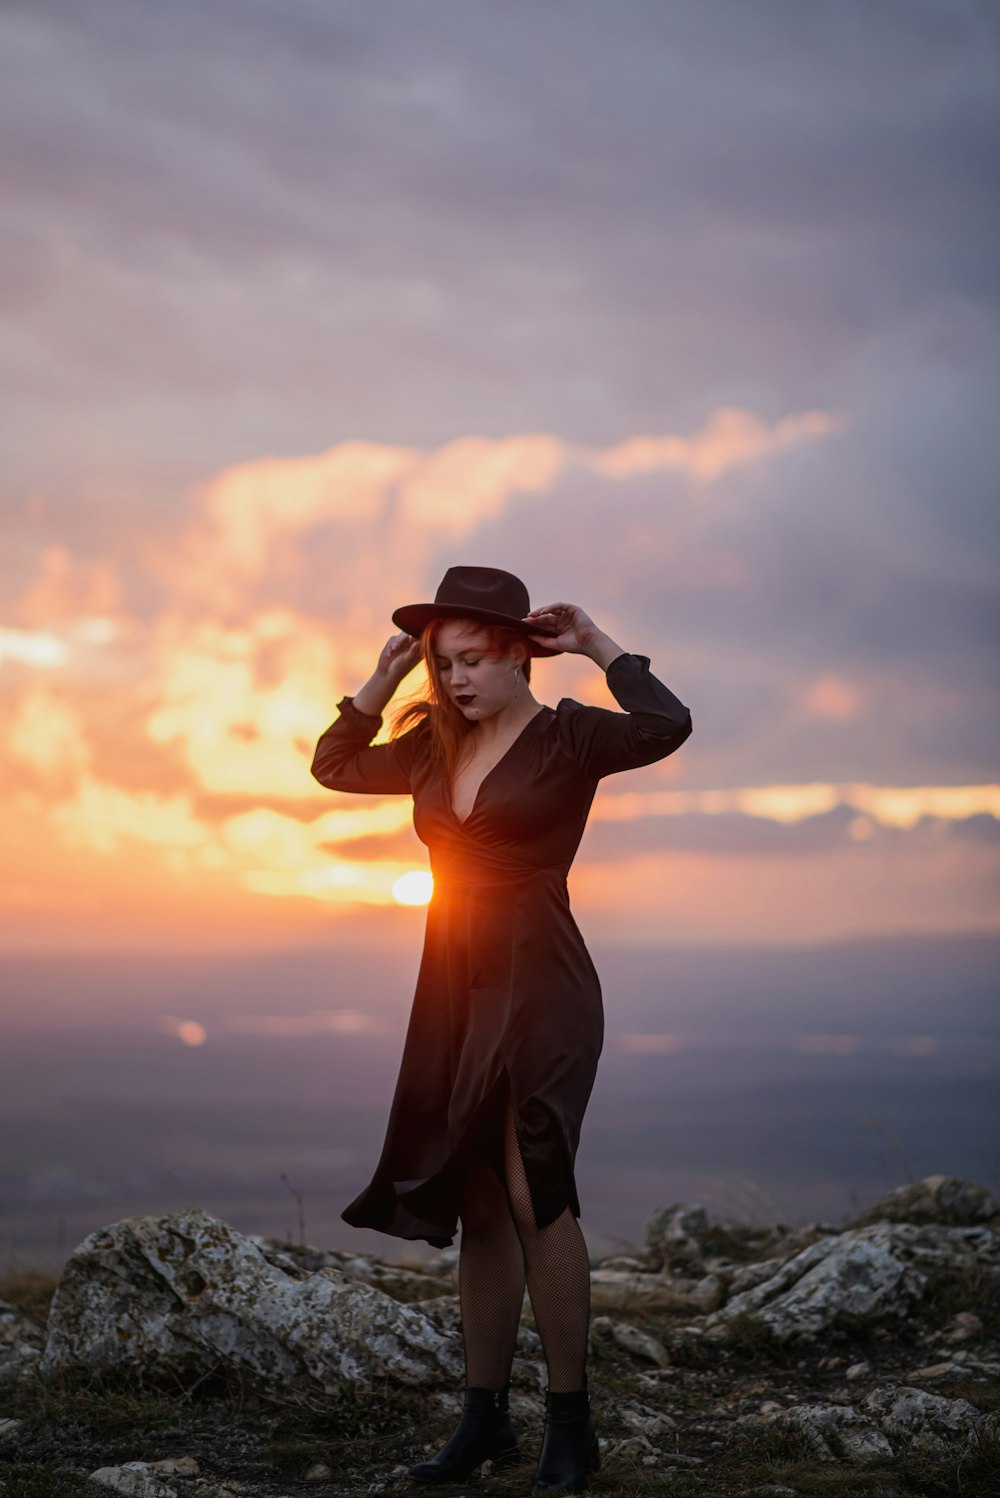 a man in a red dress and hat standing on a rocky hill